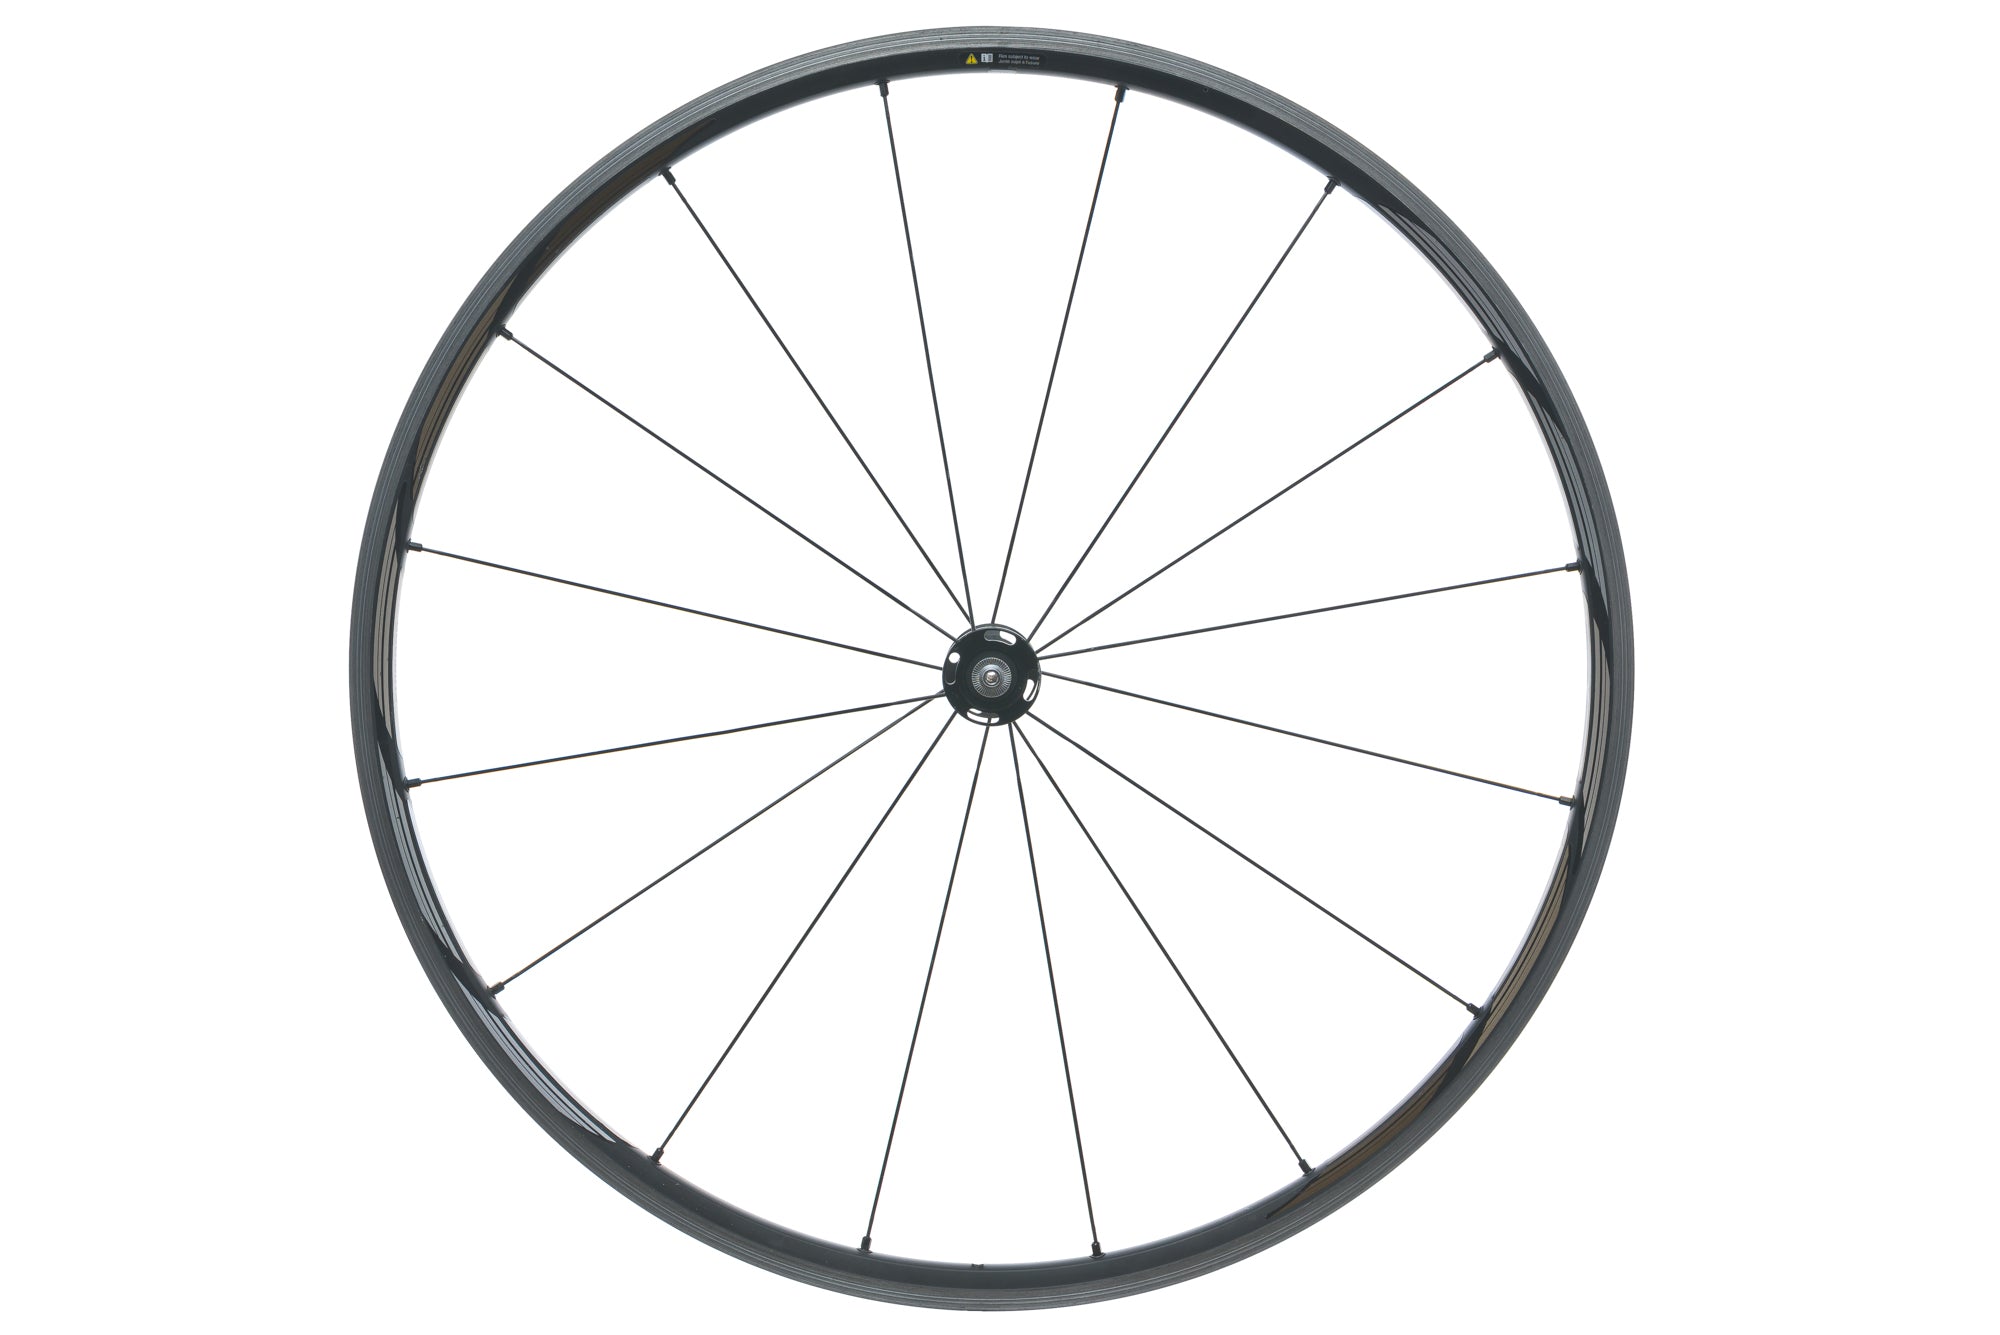 Shimano WH-RS610 Aluminum Clincher 700c Front Wheel drive side